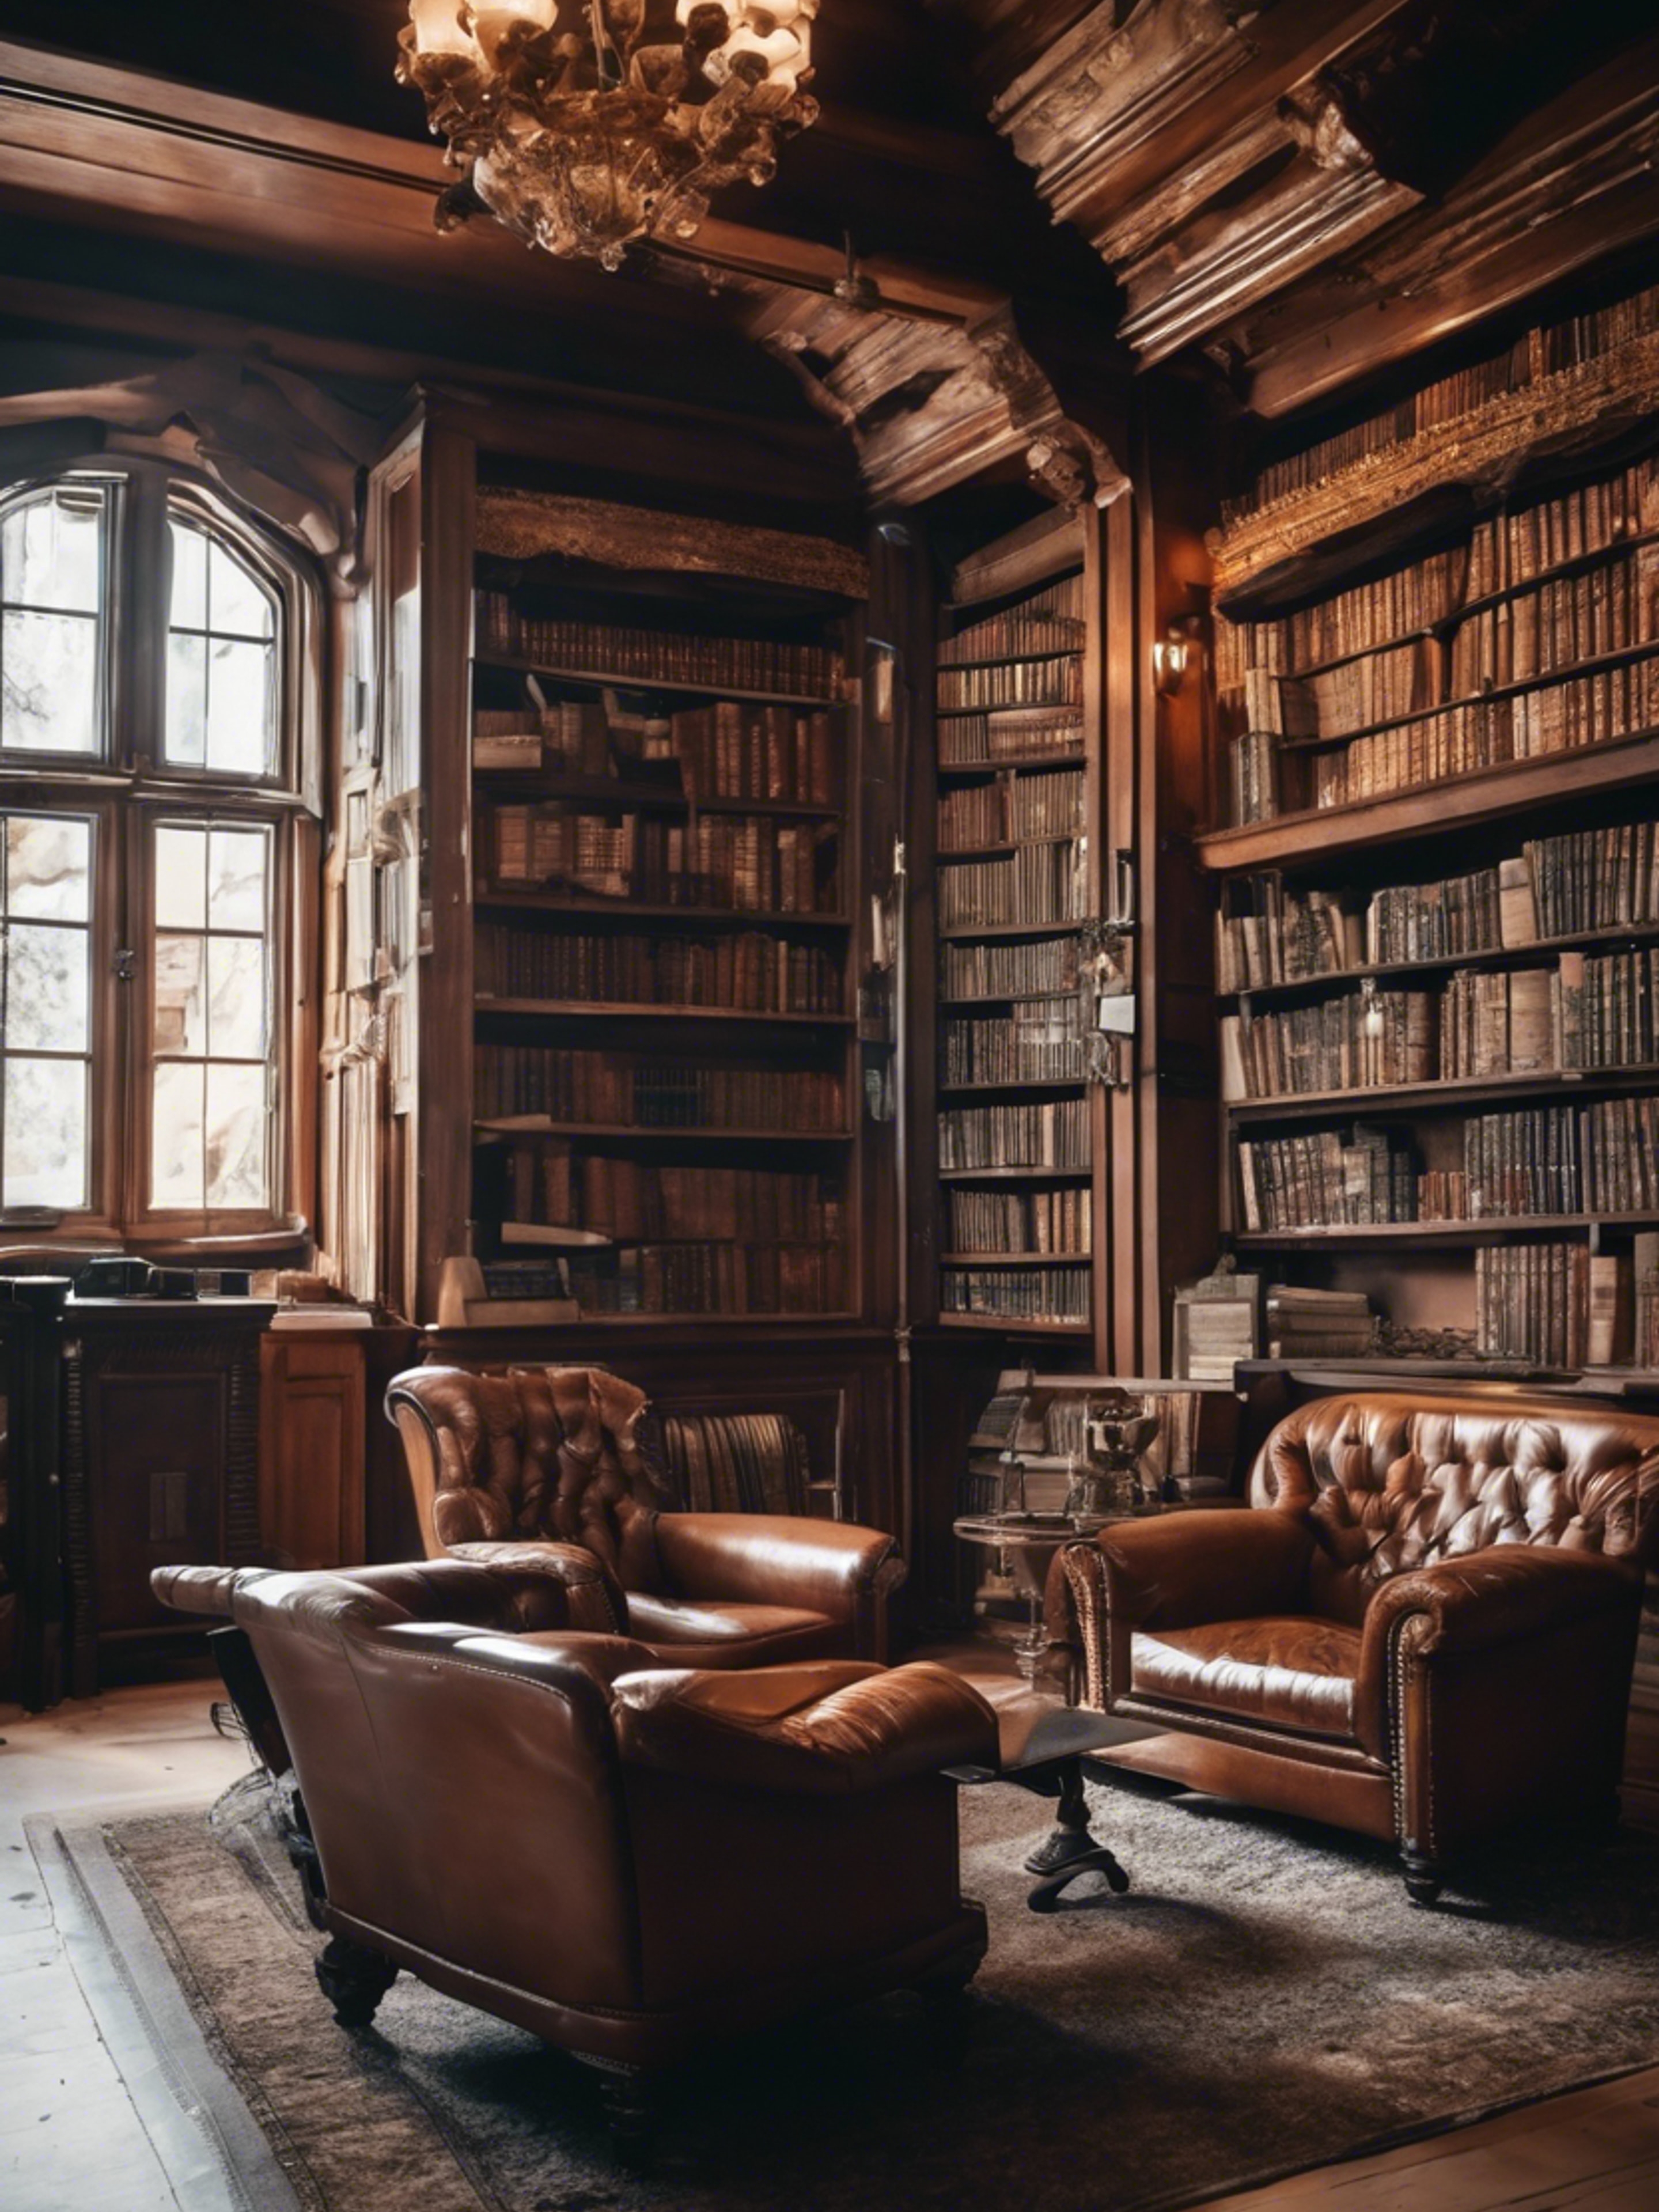 Old cozy library with leather chairs and a fireplace.壁紙[3341ca8ec4db4ab883e9]